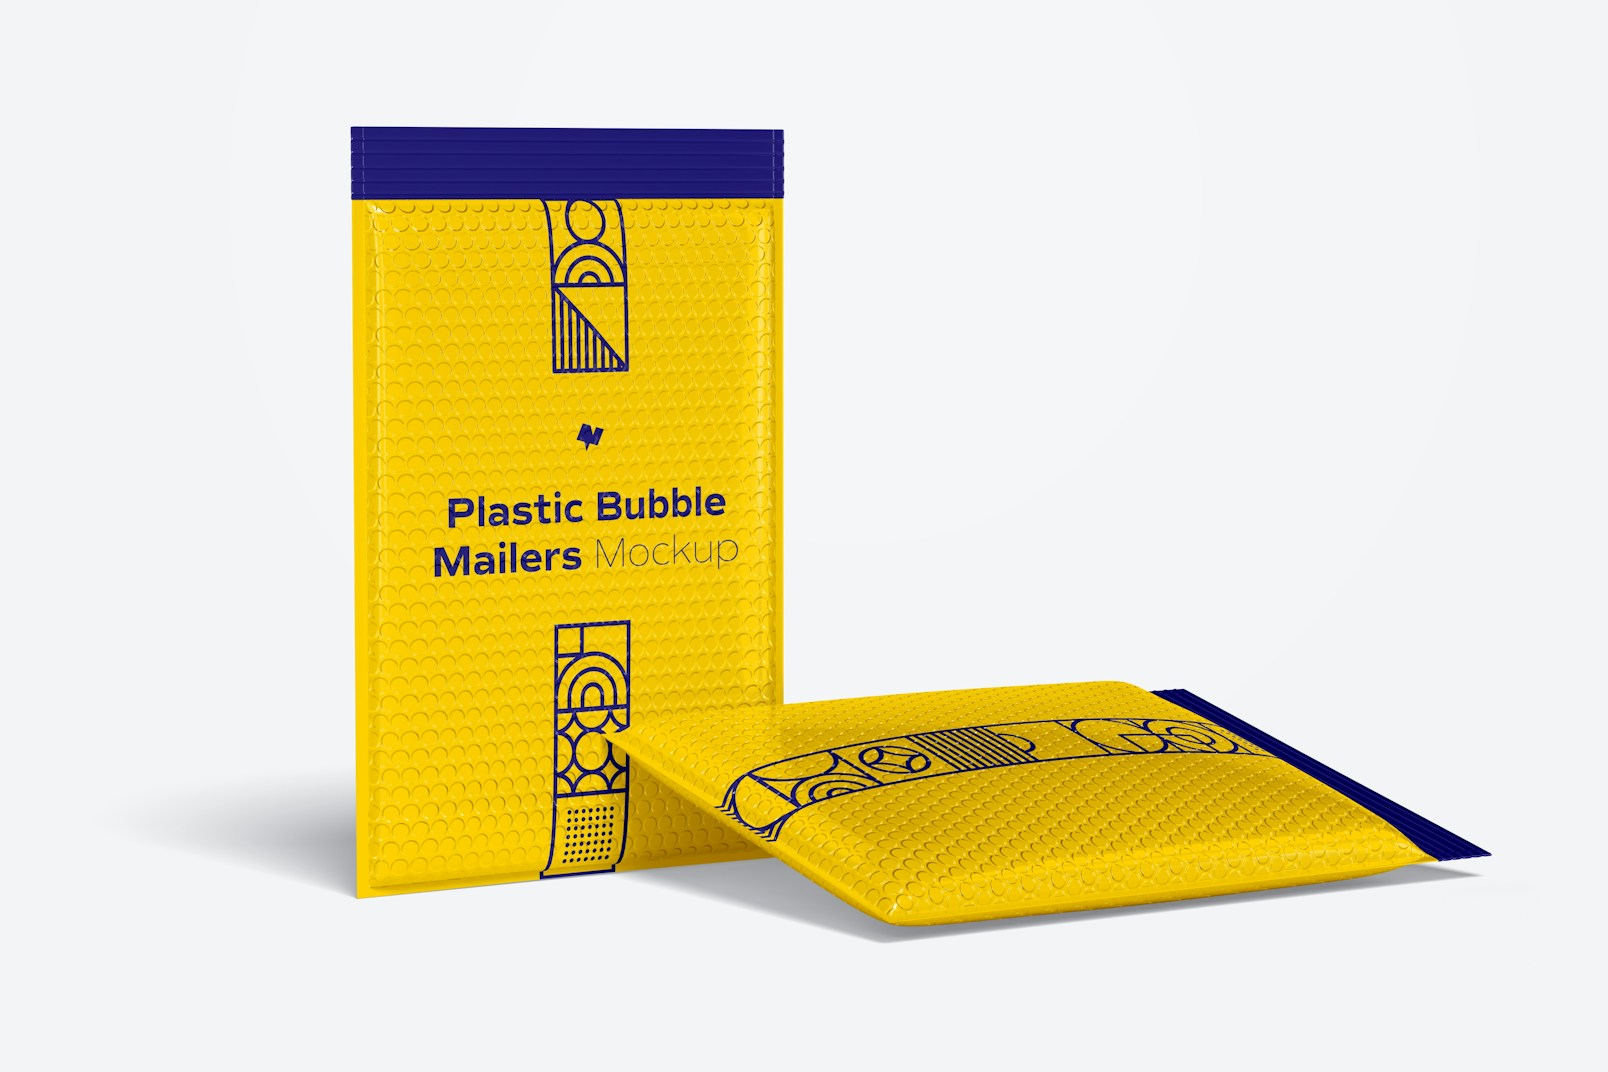 Plastic Bubble Mailers Mockup, Standing and Dropped